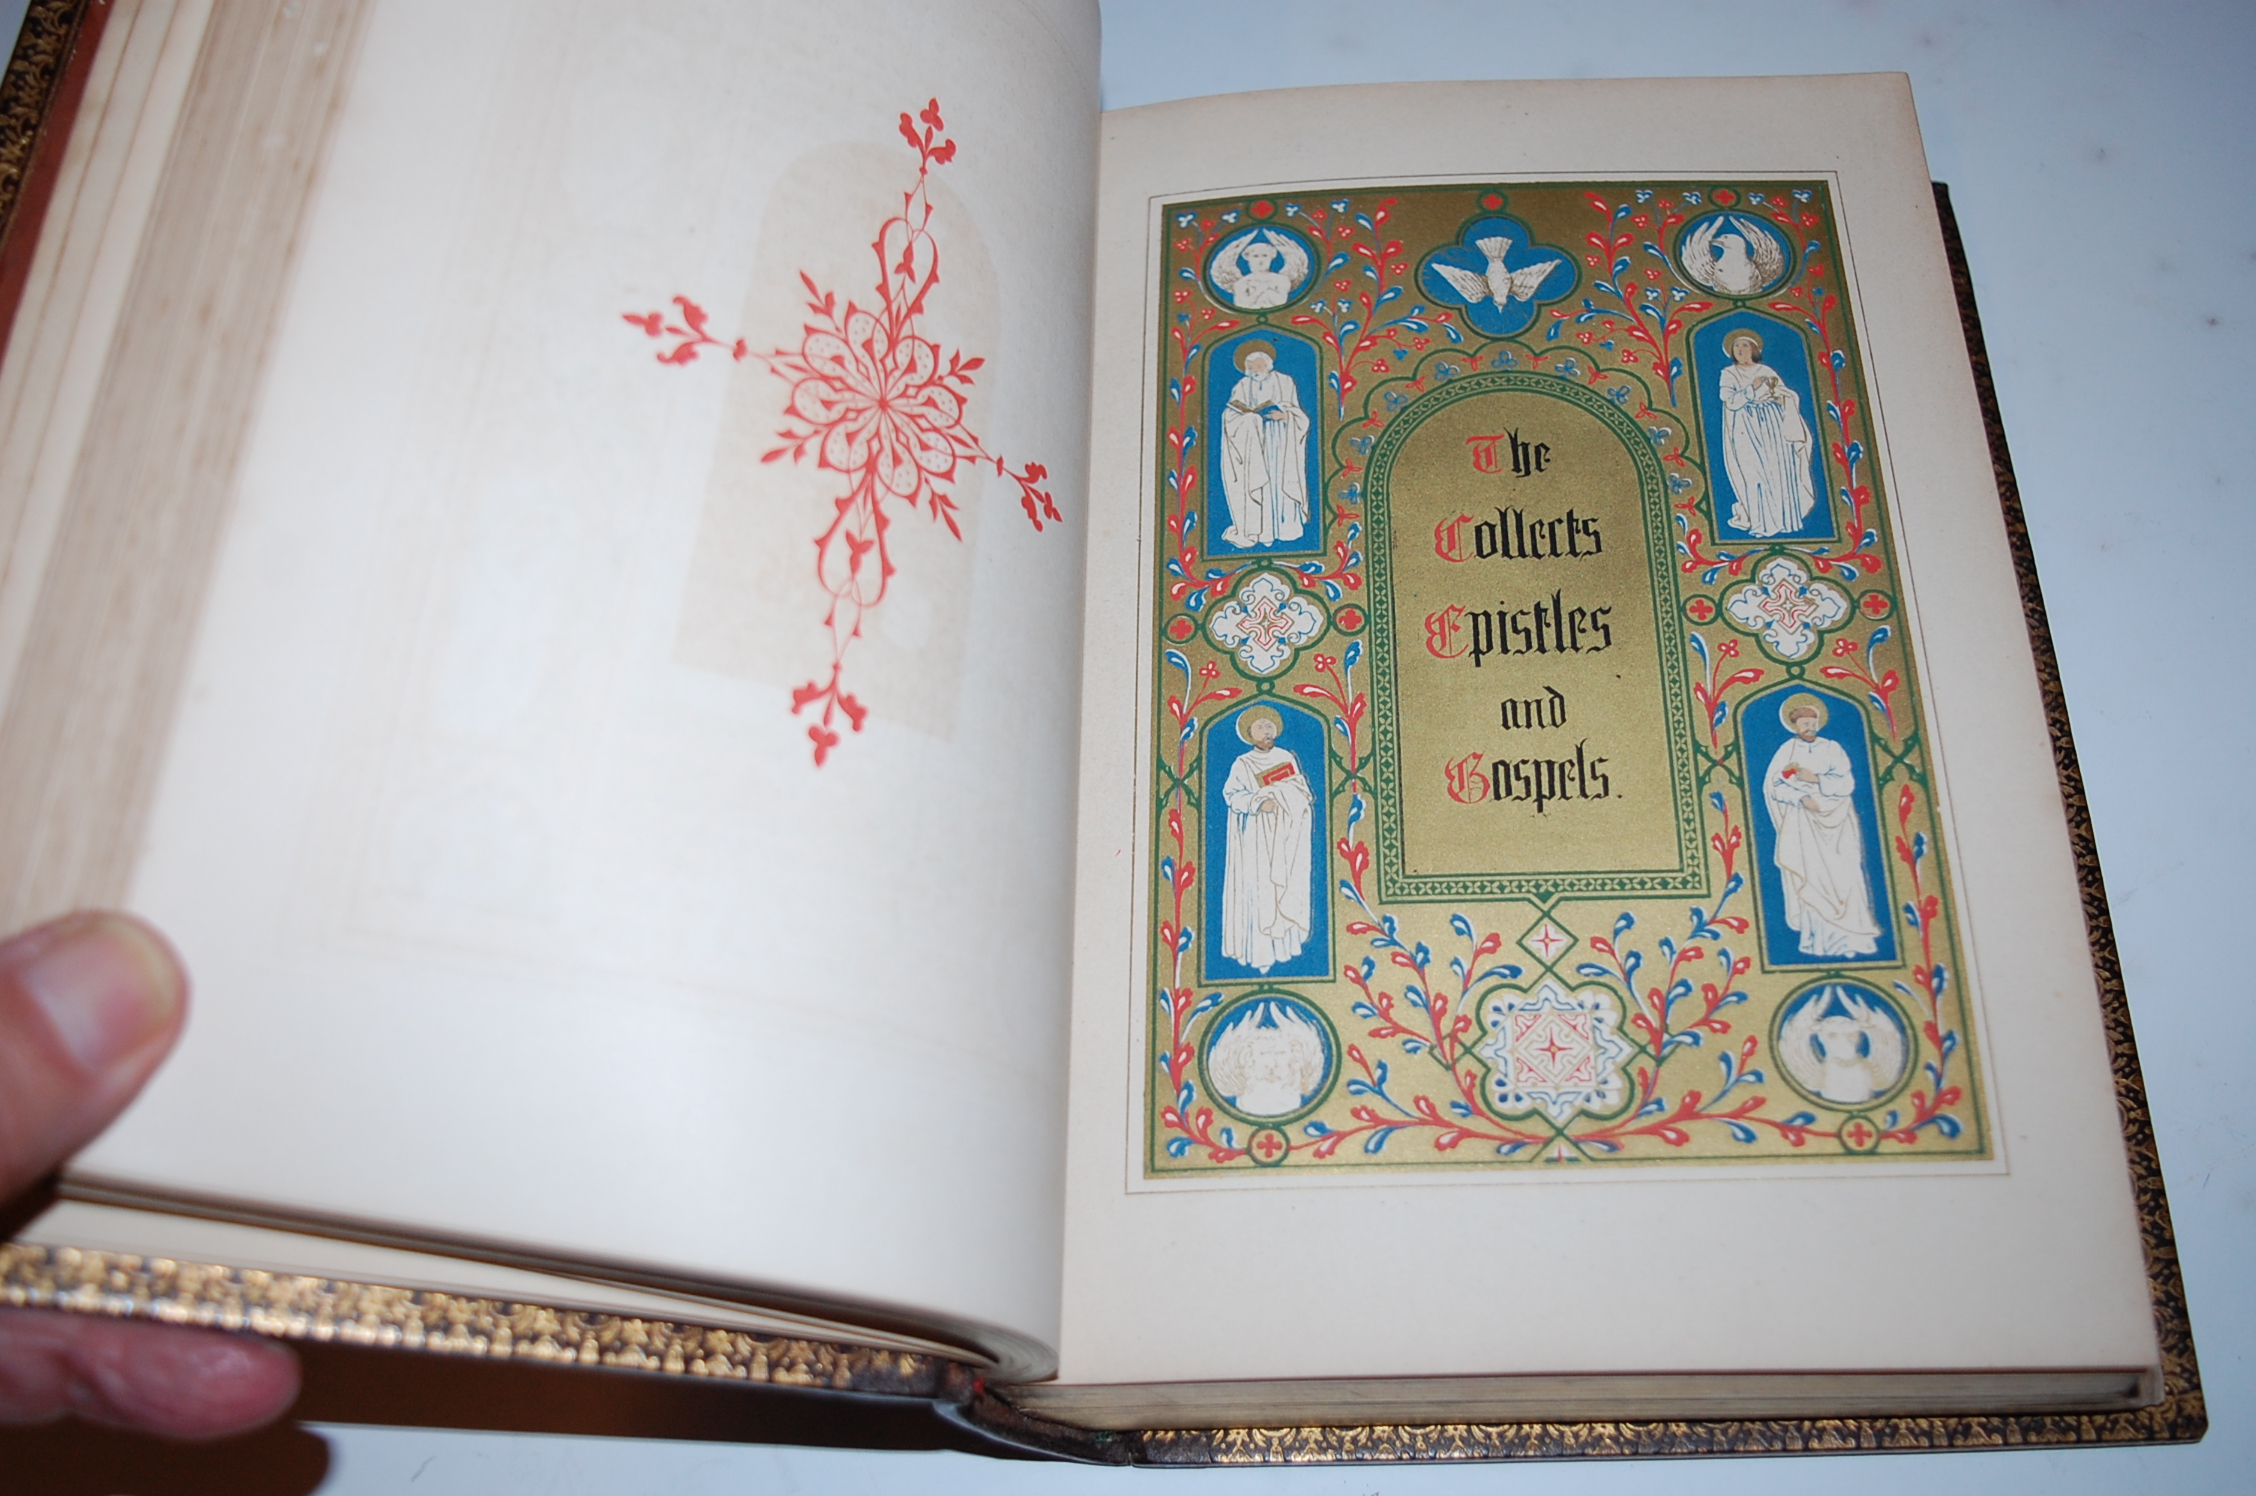 Book of Common Prayer, London, John Murray 1845, large 8vo, full embossed decorative leather, - Image 4 of 6